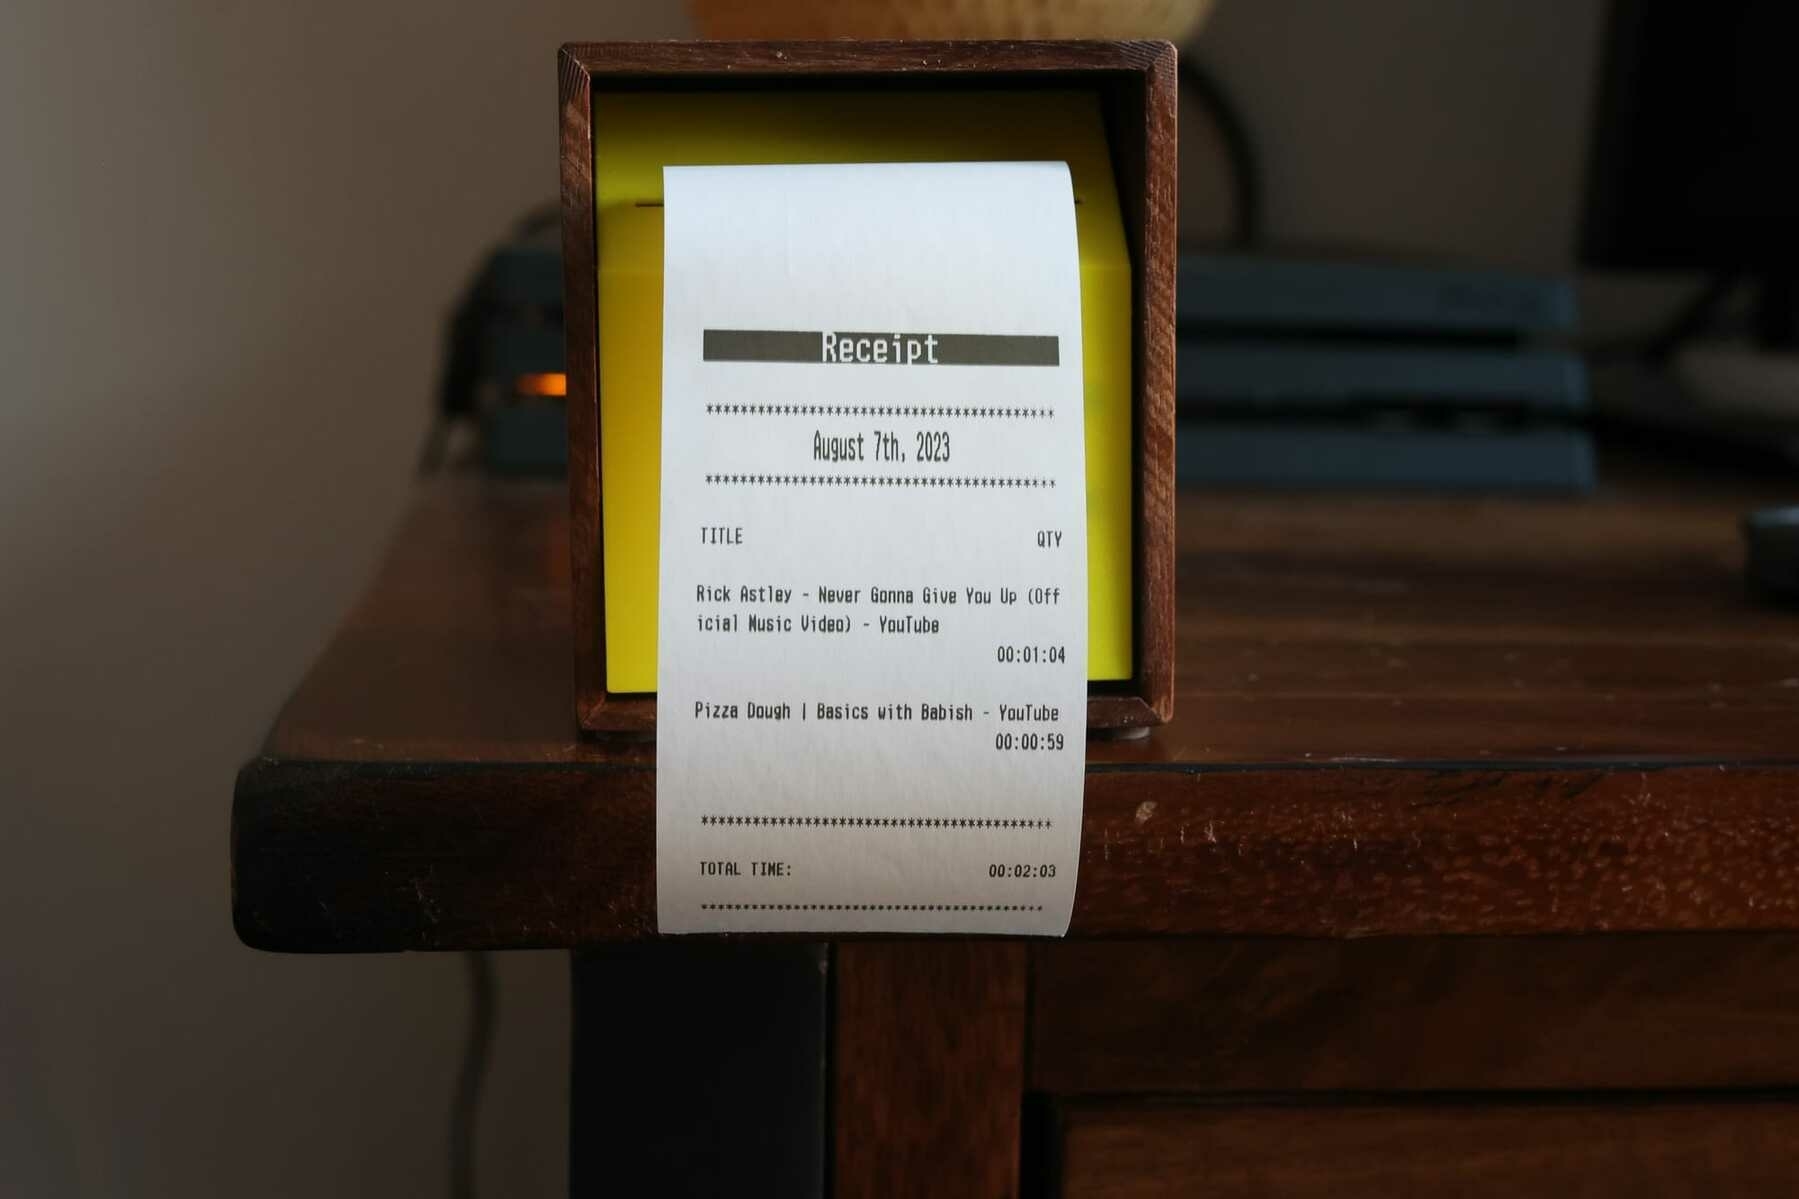 A machine showing a receipt that lists youtube videos watched and their duration. 